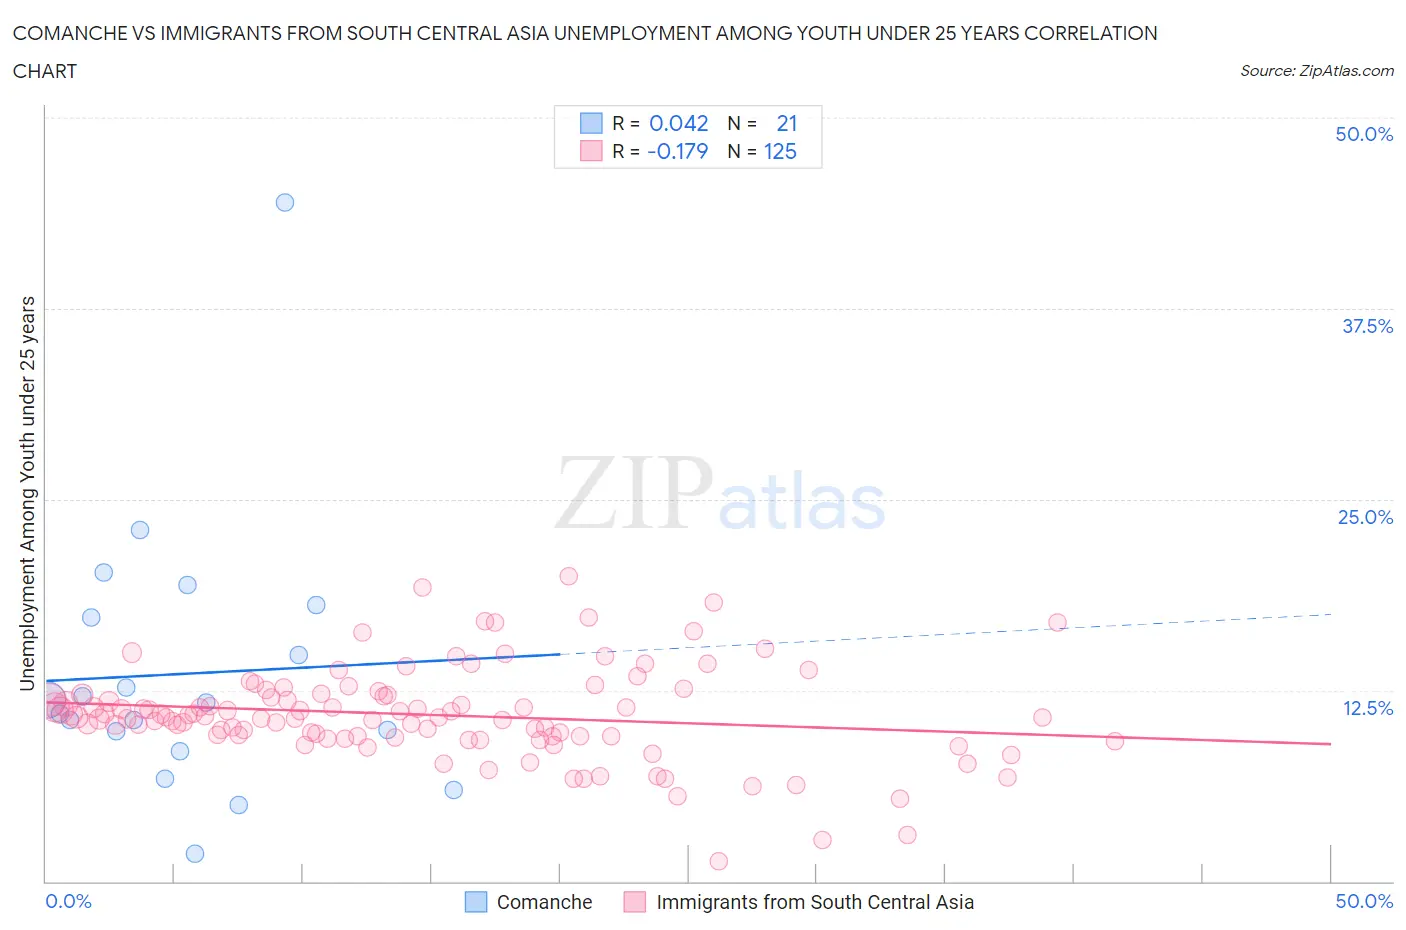 Comanche vs Immigrants from South Central Asia Unemployment Among Youth under 25 years